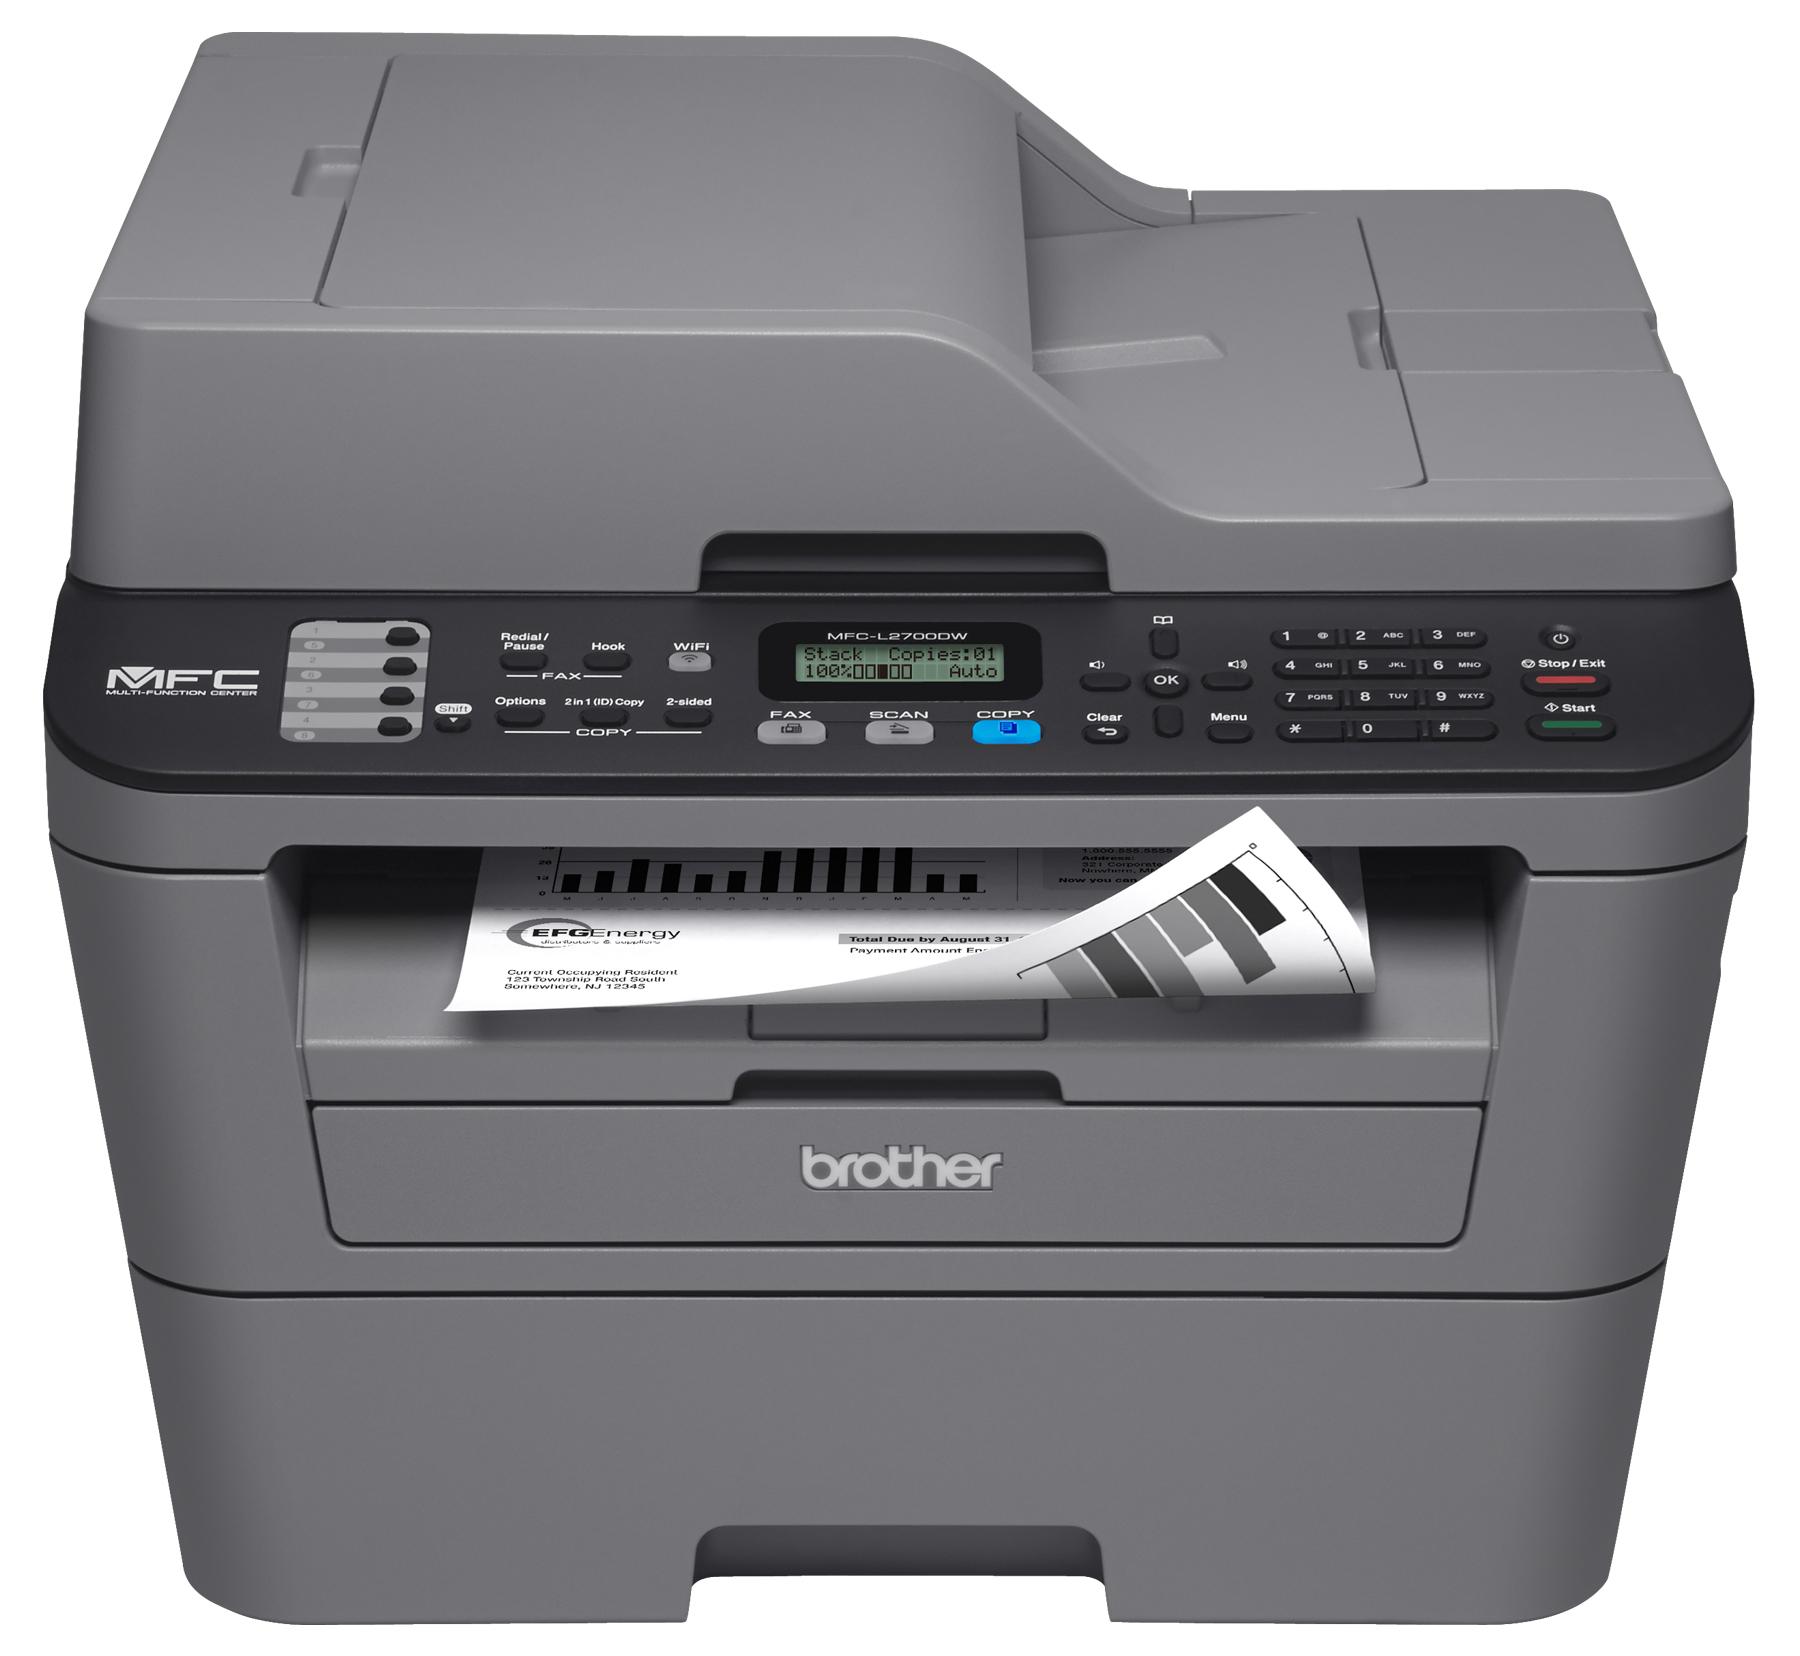 Brother L2700dw Driver Download